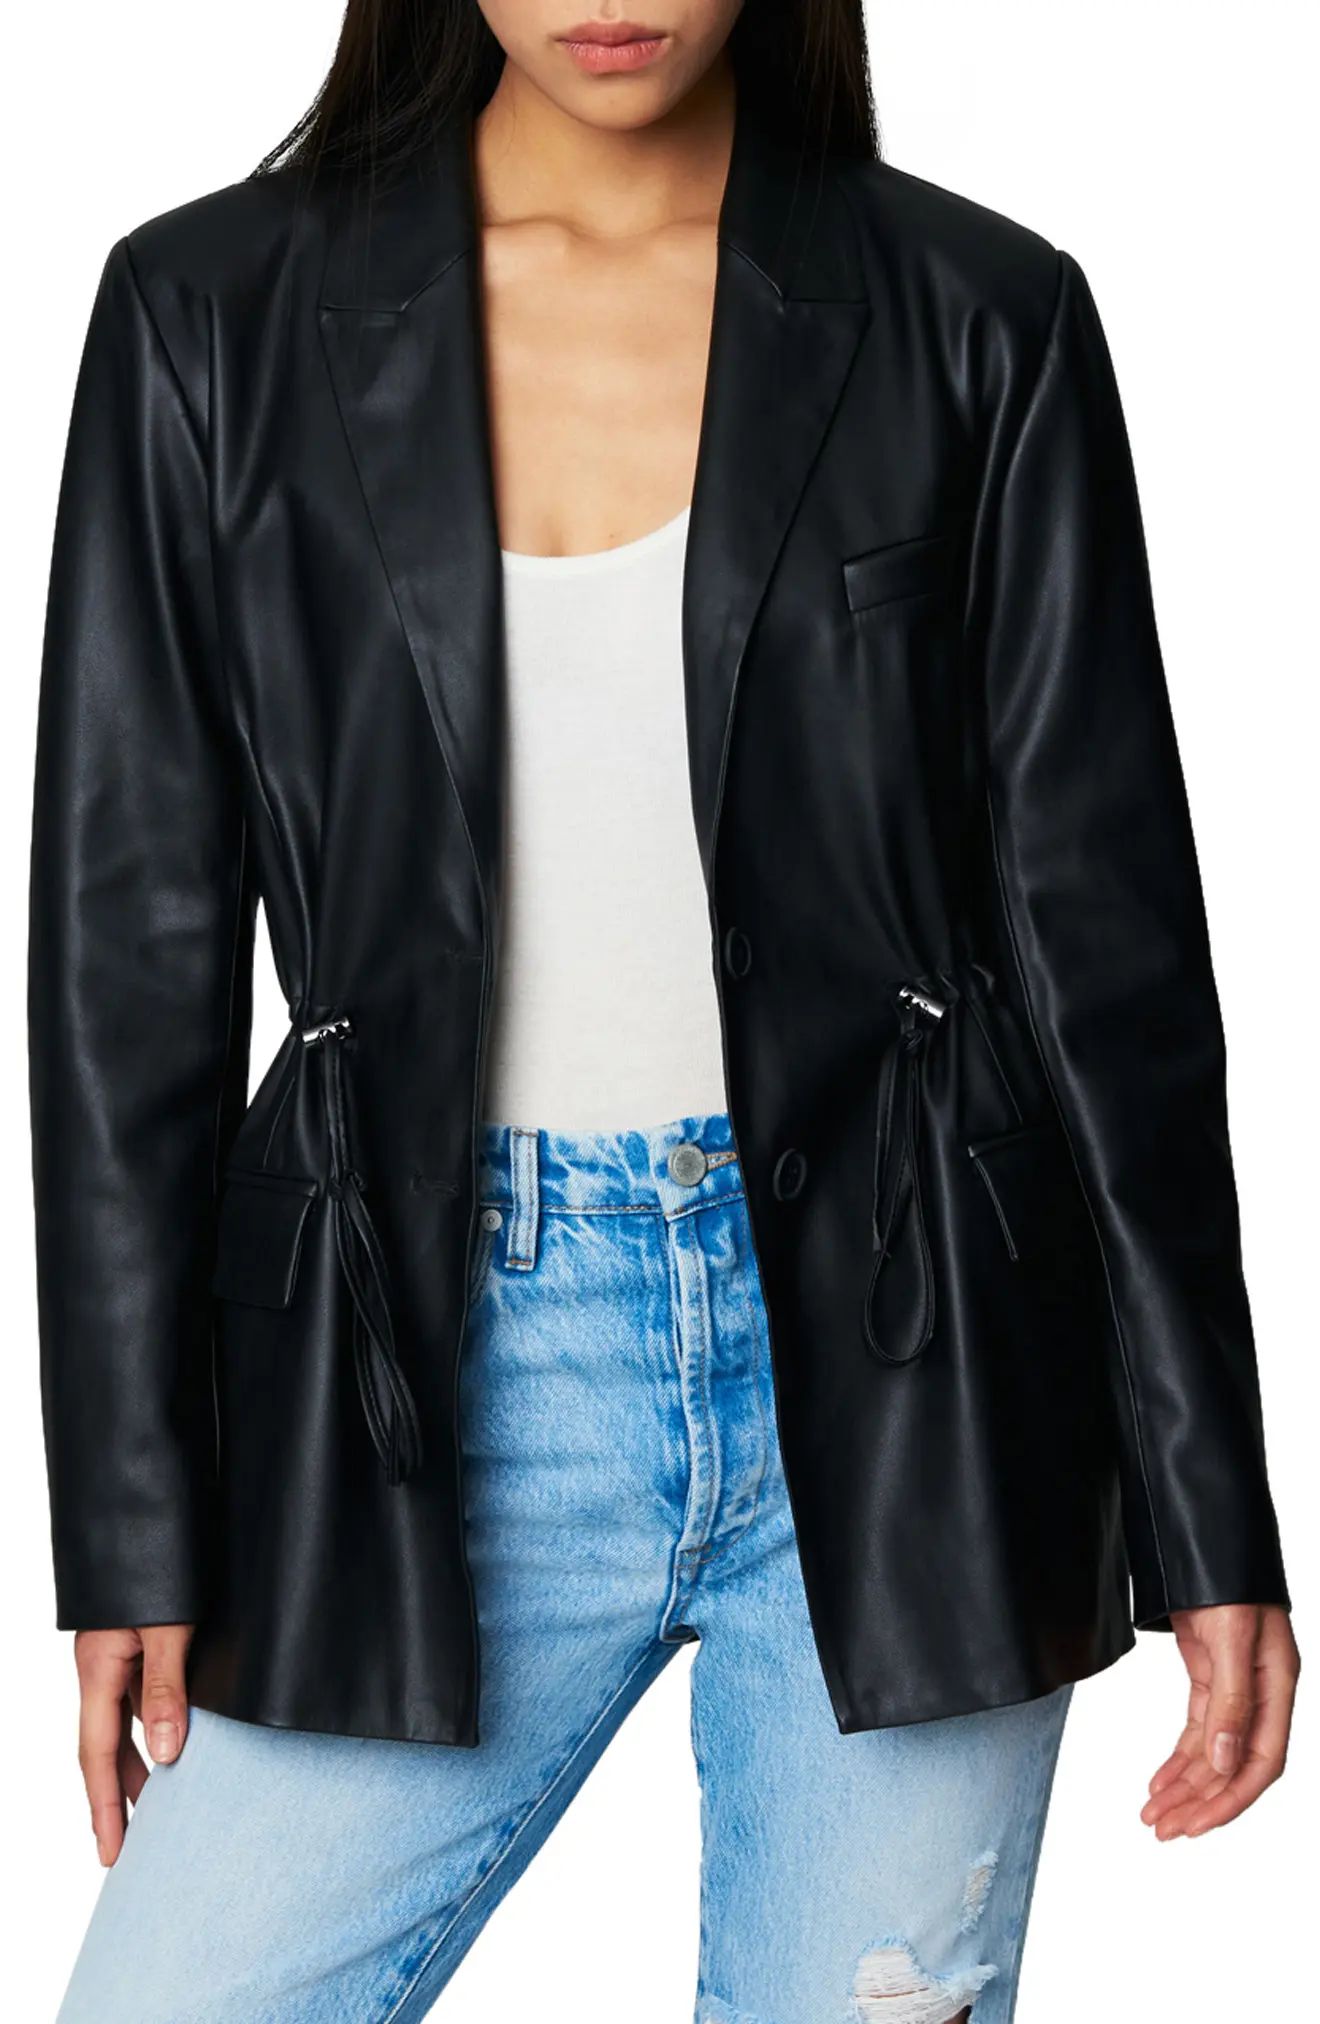 BLANKNYC Drawcord Waist Faux Leather Blazer, Size Small in Best Shot at Nordstrom | Nordstrom